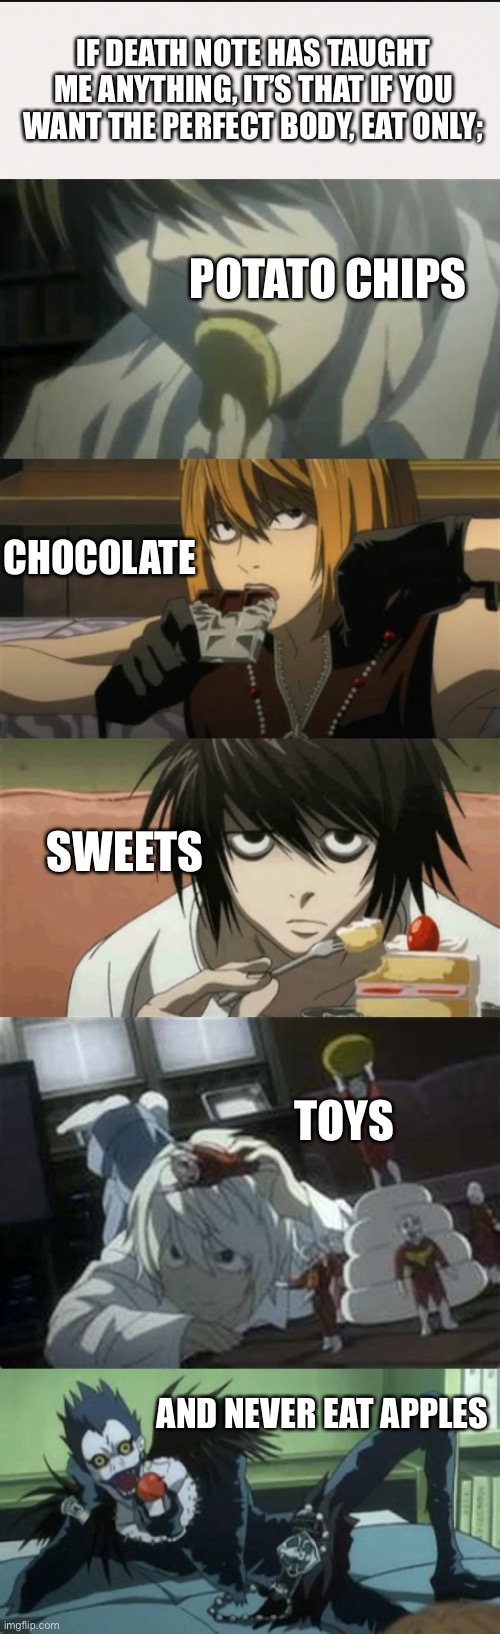 I guess I should try the new diet... | IF DEATH NOTE HAS TAUGHT ME ANYTHING, IT’S THAT IF YOU WANT THE PERFECT BODY, EAT ONLY;; POTATO CHIPS; CHOCOLATE; SWEETS; TOYS; AND NEVER EAT APPLES | image tagged in death note,perfect body,anime,manga,unhealthy,potato chips chocolate sweets toys apples | made w/ Imgflip meme maker